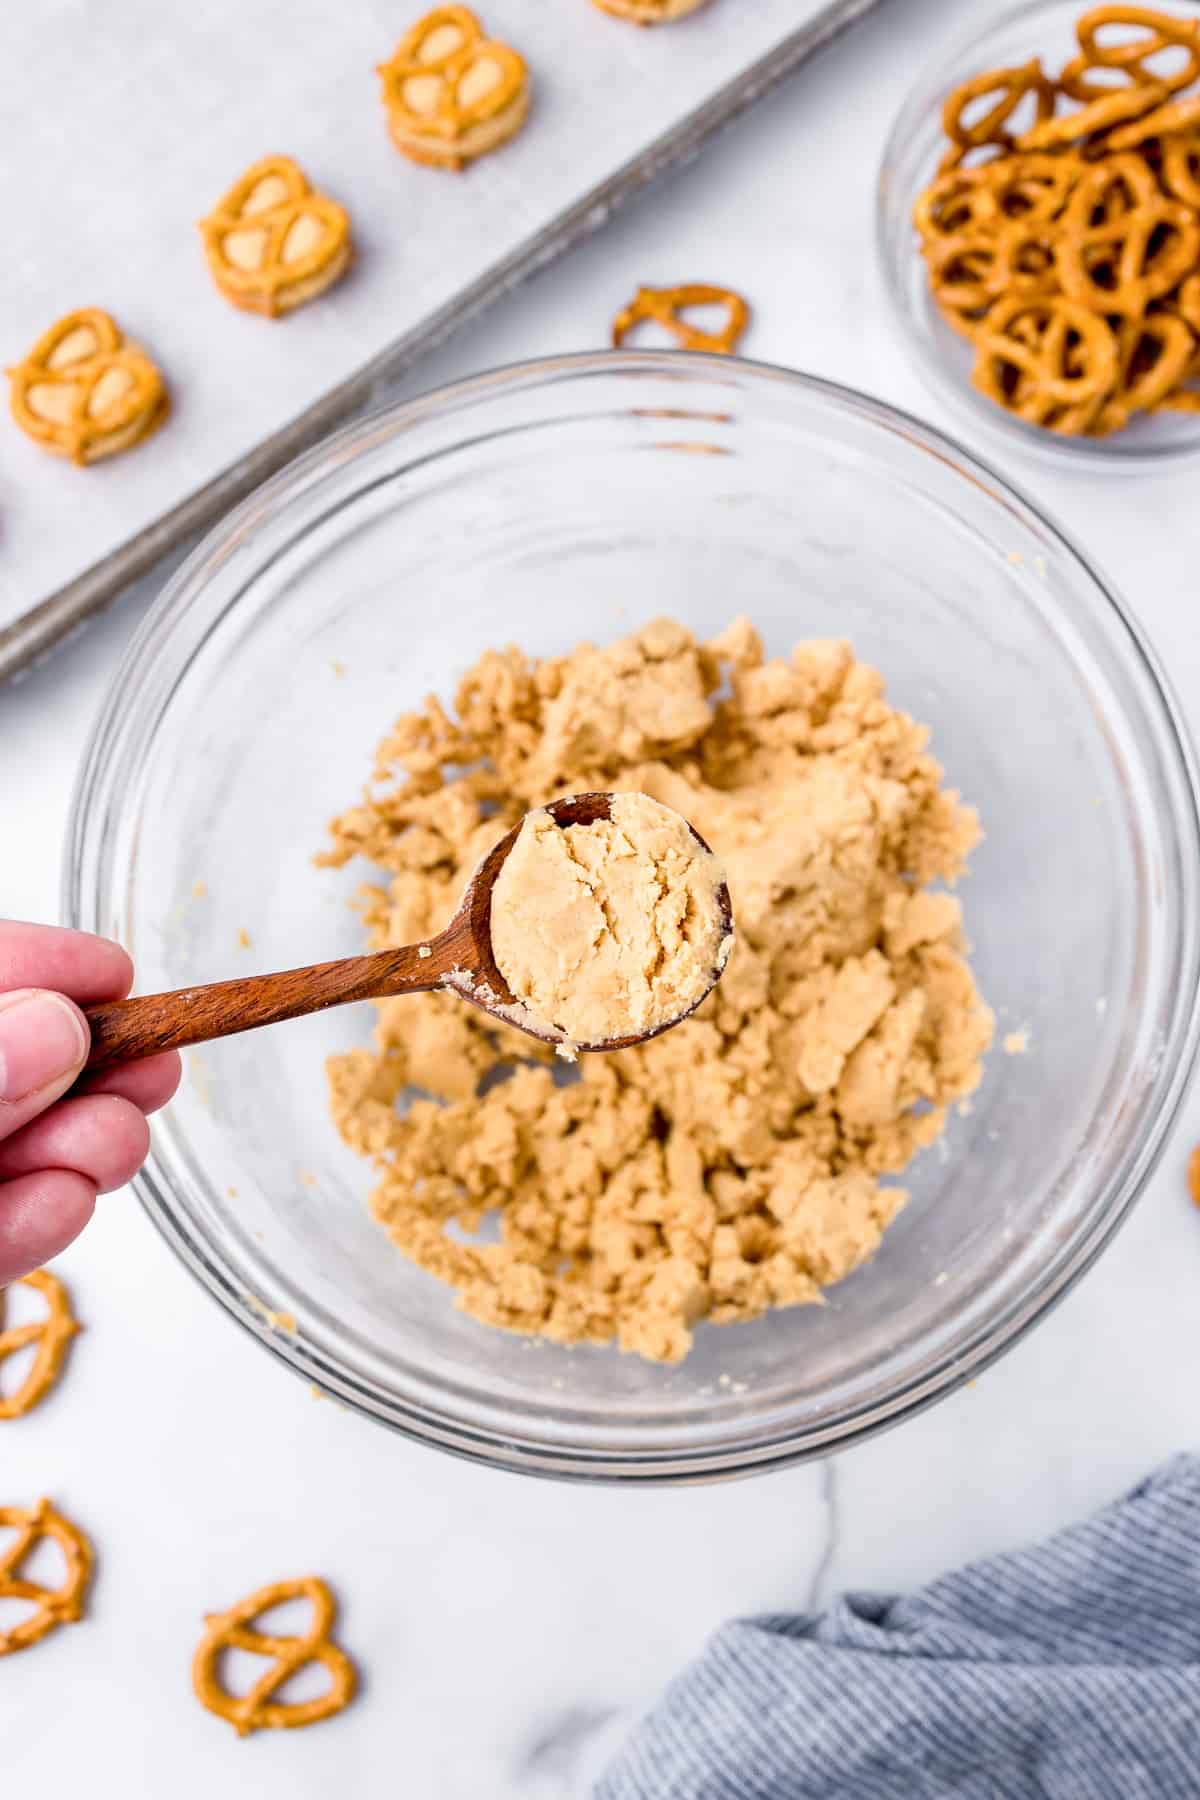 Scooping peanut butter pretzel dough from a bowl below with a cookie sheet with more peanut butter dough balls nearby.